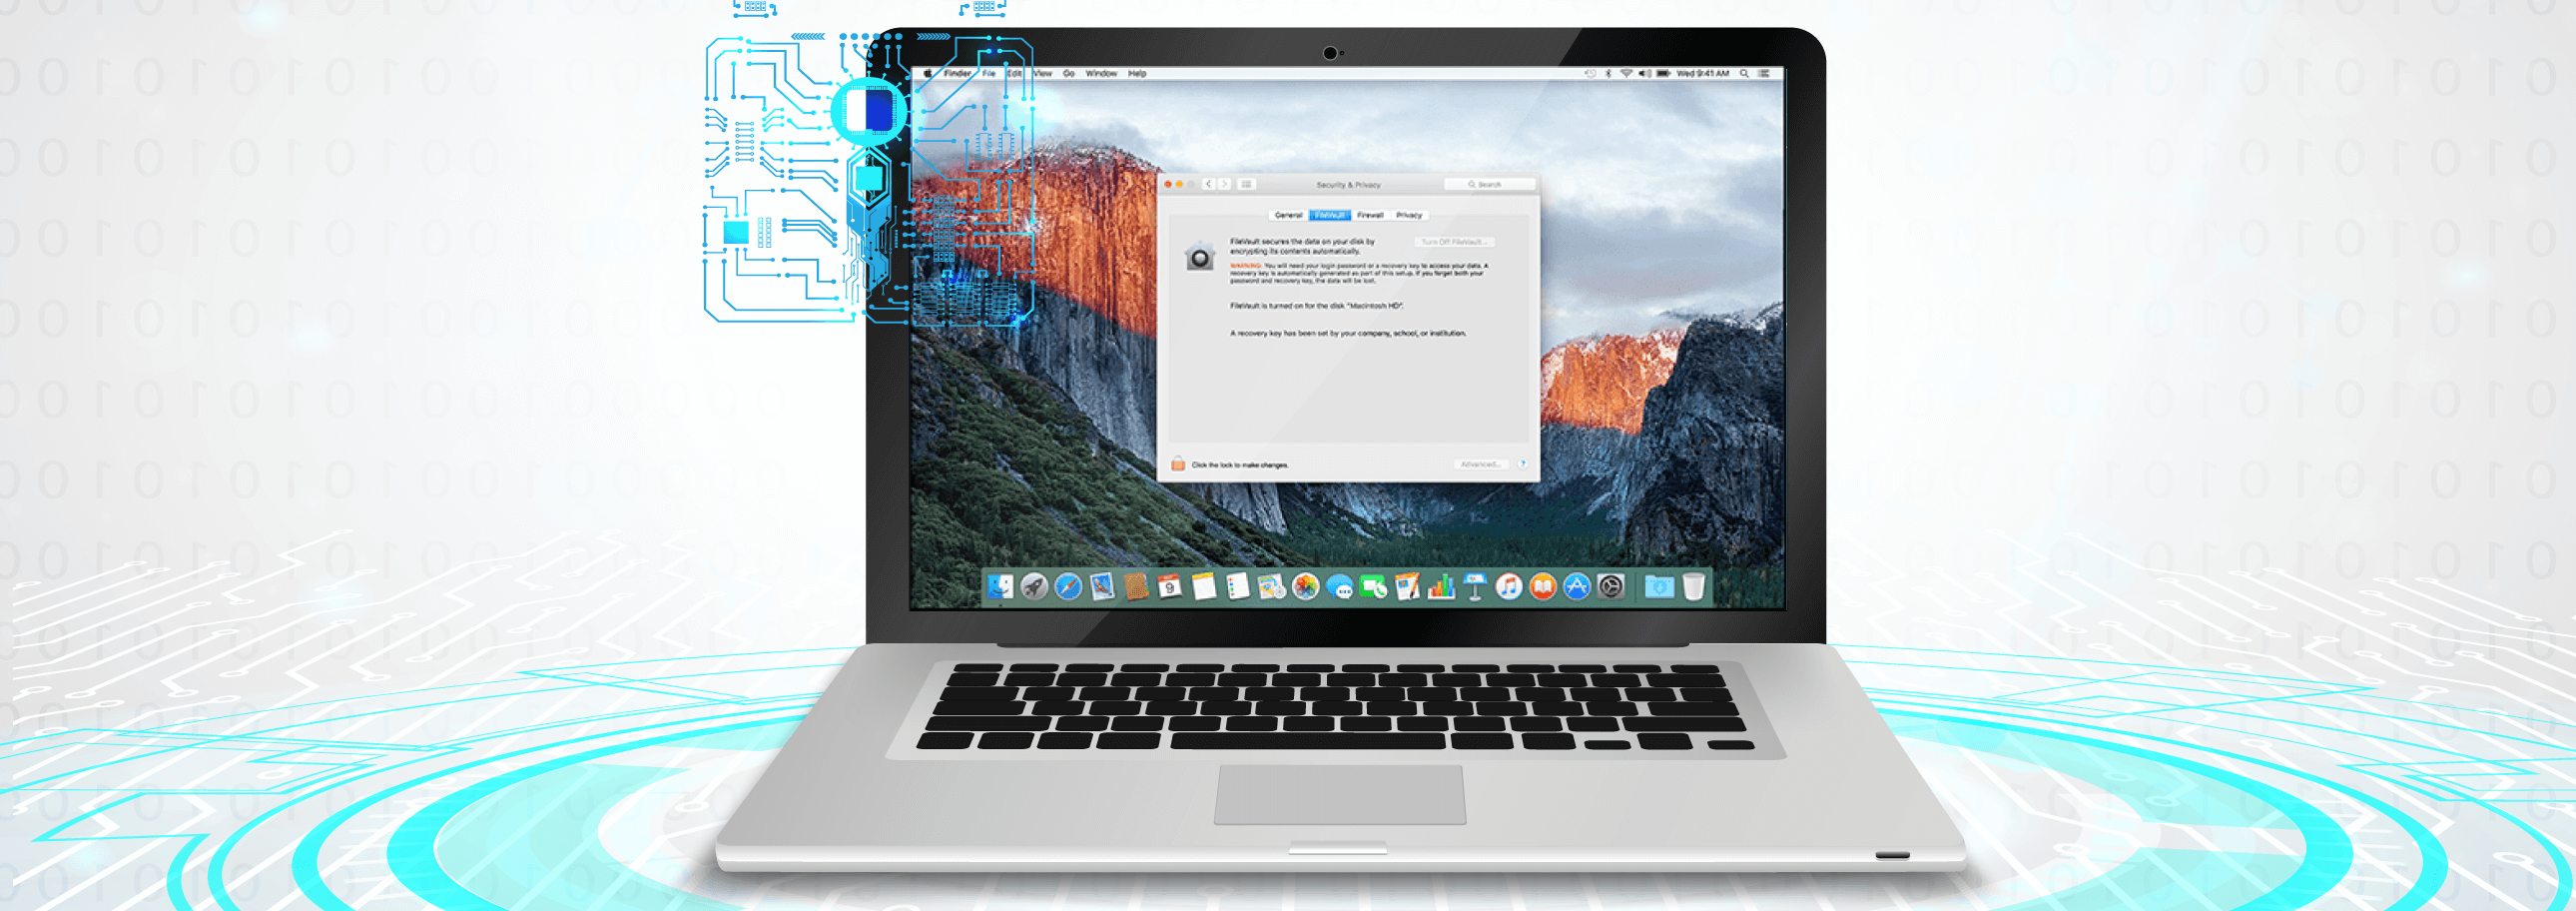 FileVault Encryption for a secure macOS Banner